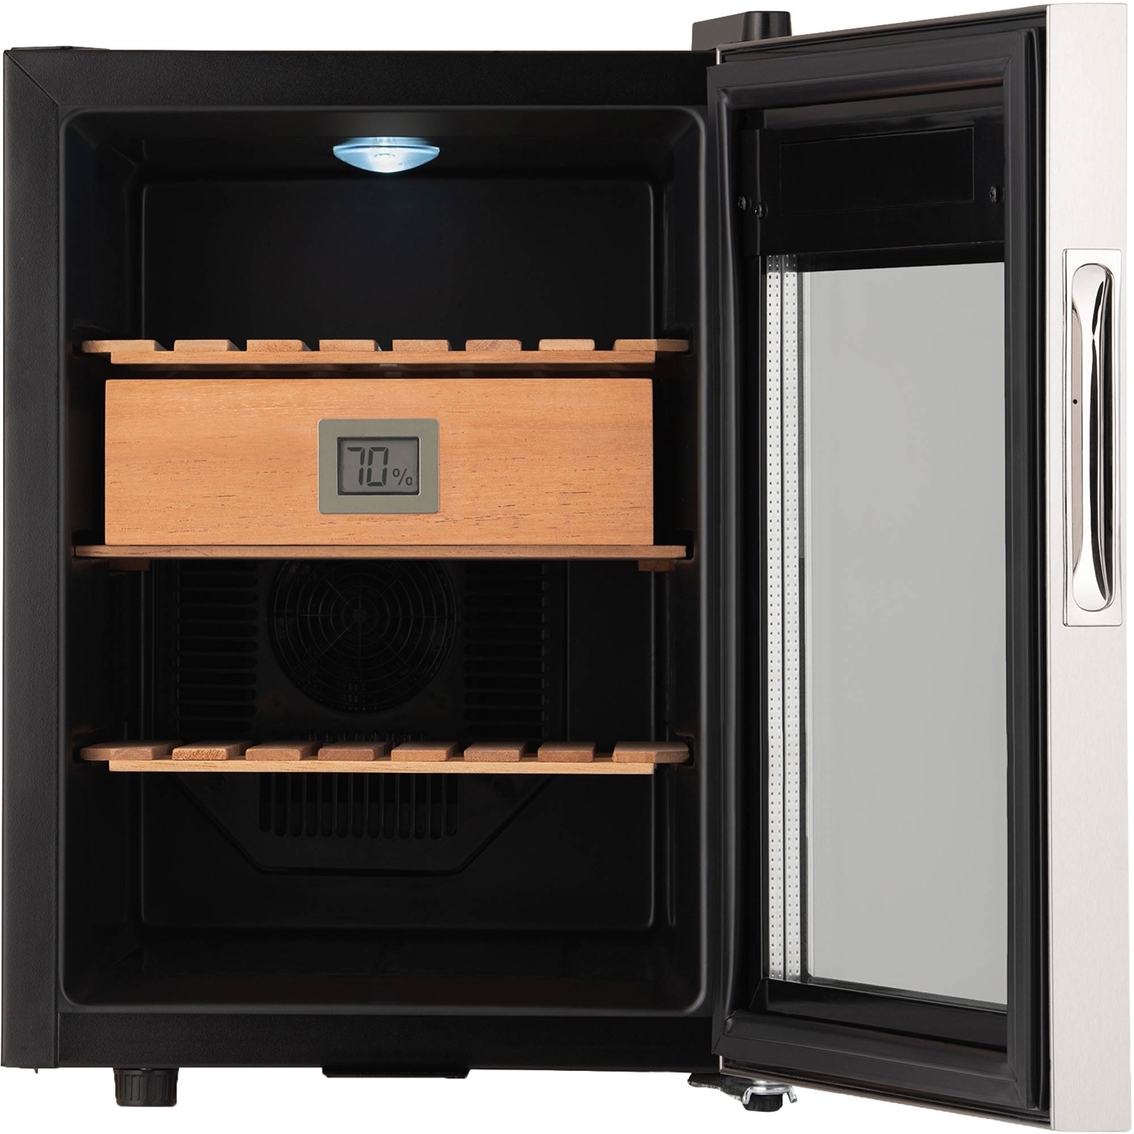 NewAir 250 Count Electric Cigar Humidor Wineador with OptiTemp - Image 2 of 9